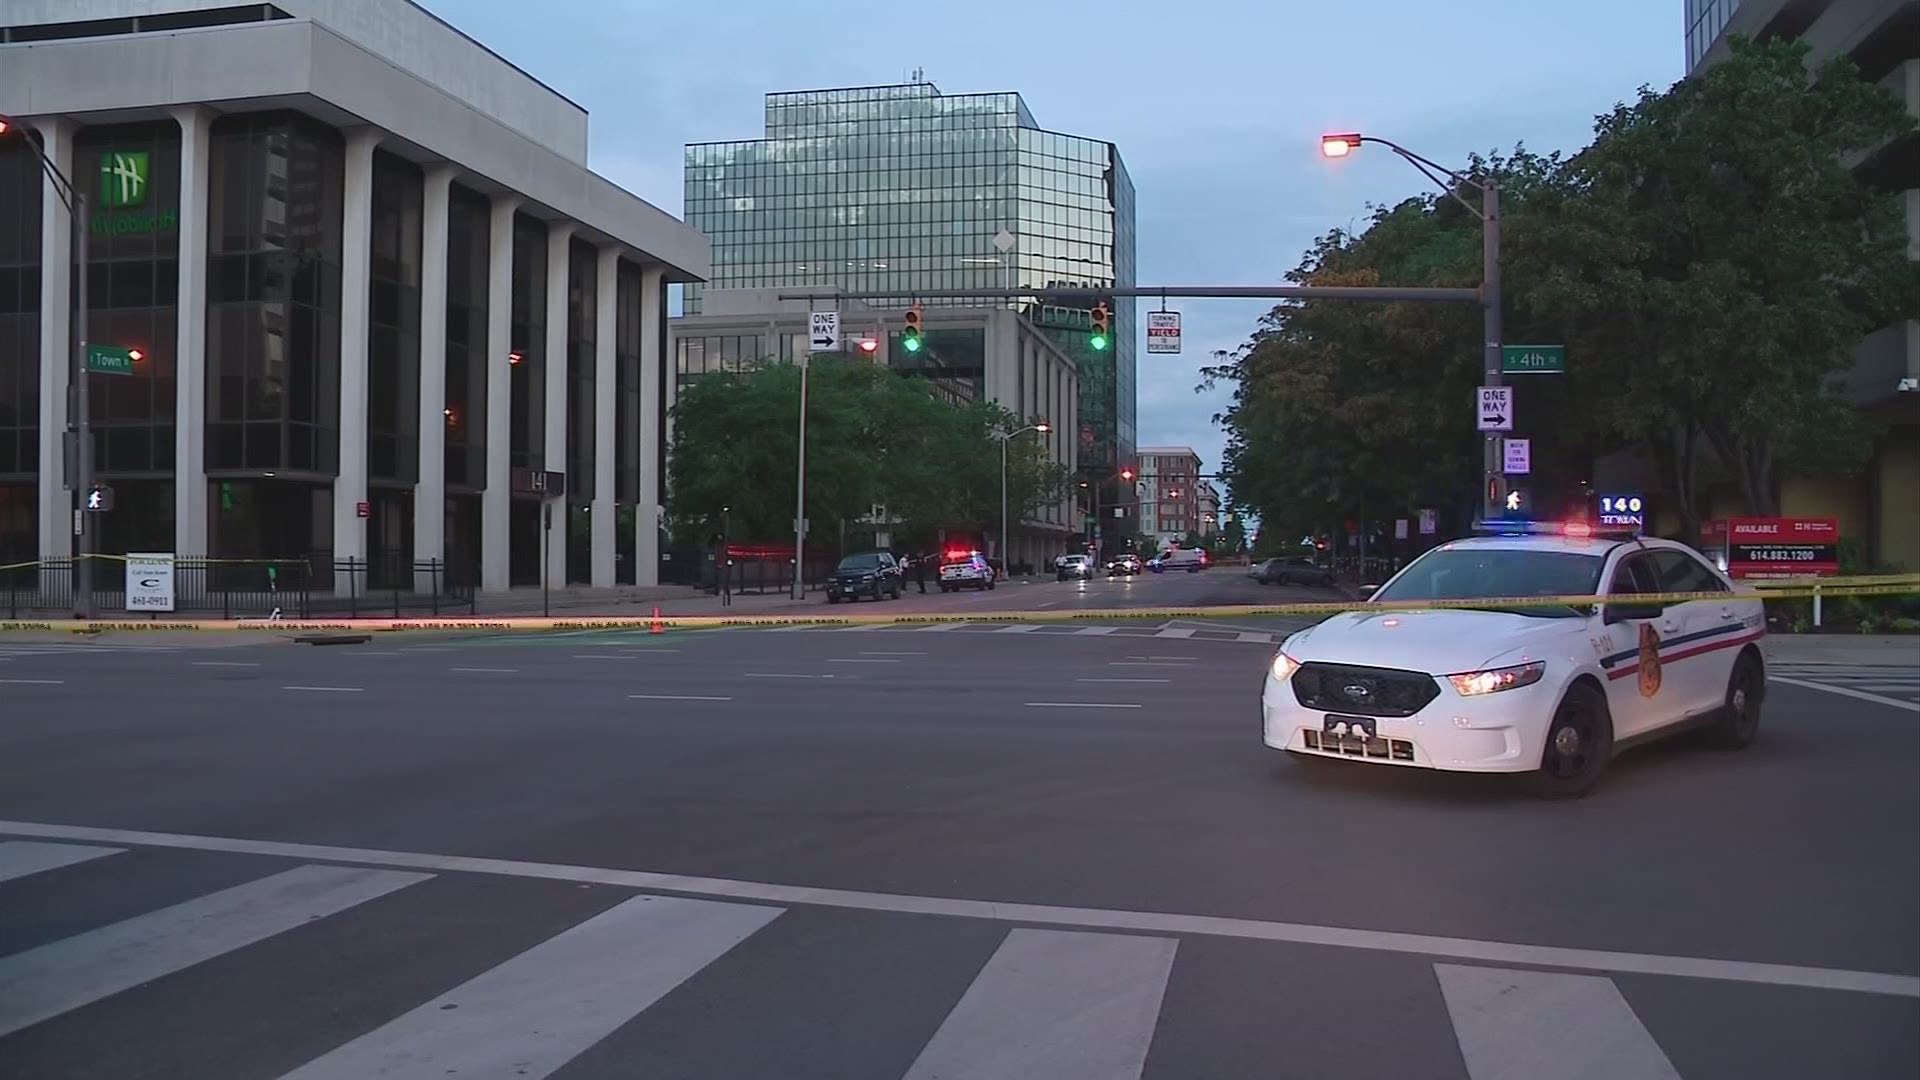 According to a release, Columbus police have responded to more than 300 calls so far in 2021 for concerns about stabbings, overdoses and a shooting in late May.